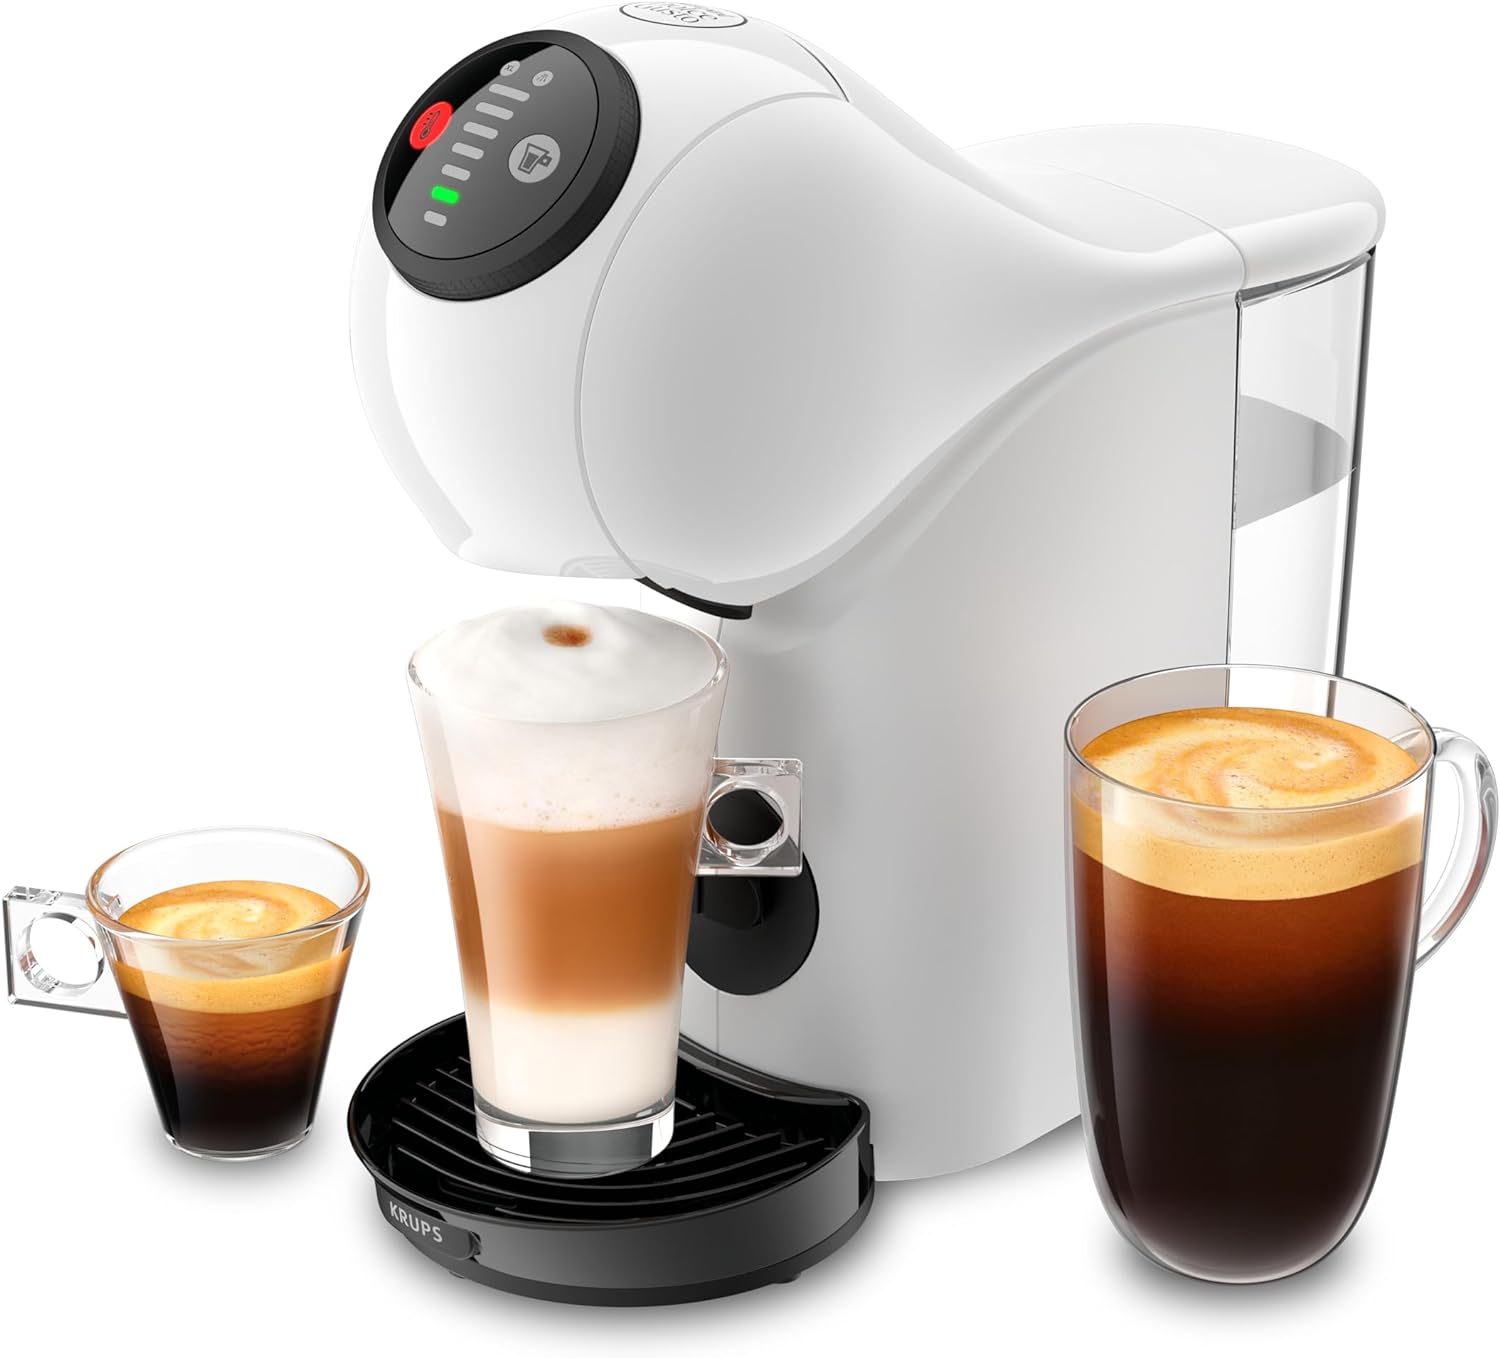 CAFET. KRUPS KP2431 GENIO S BASIC DOLCE GUSTO BCA